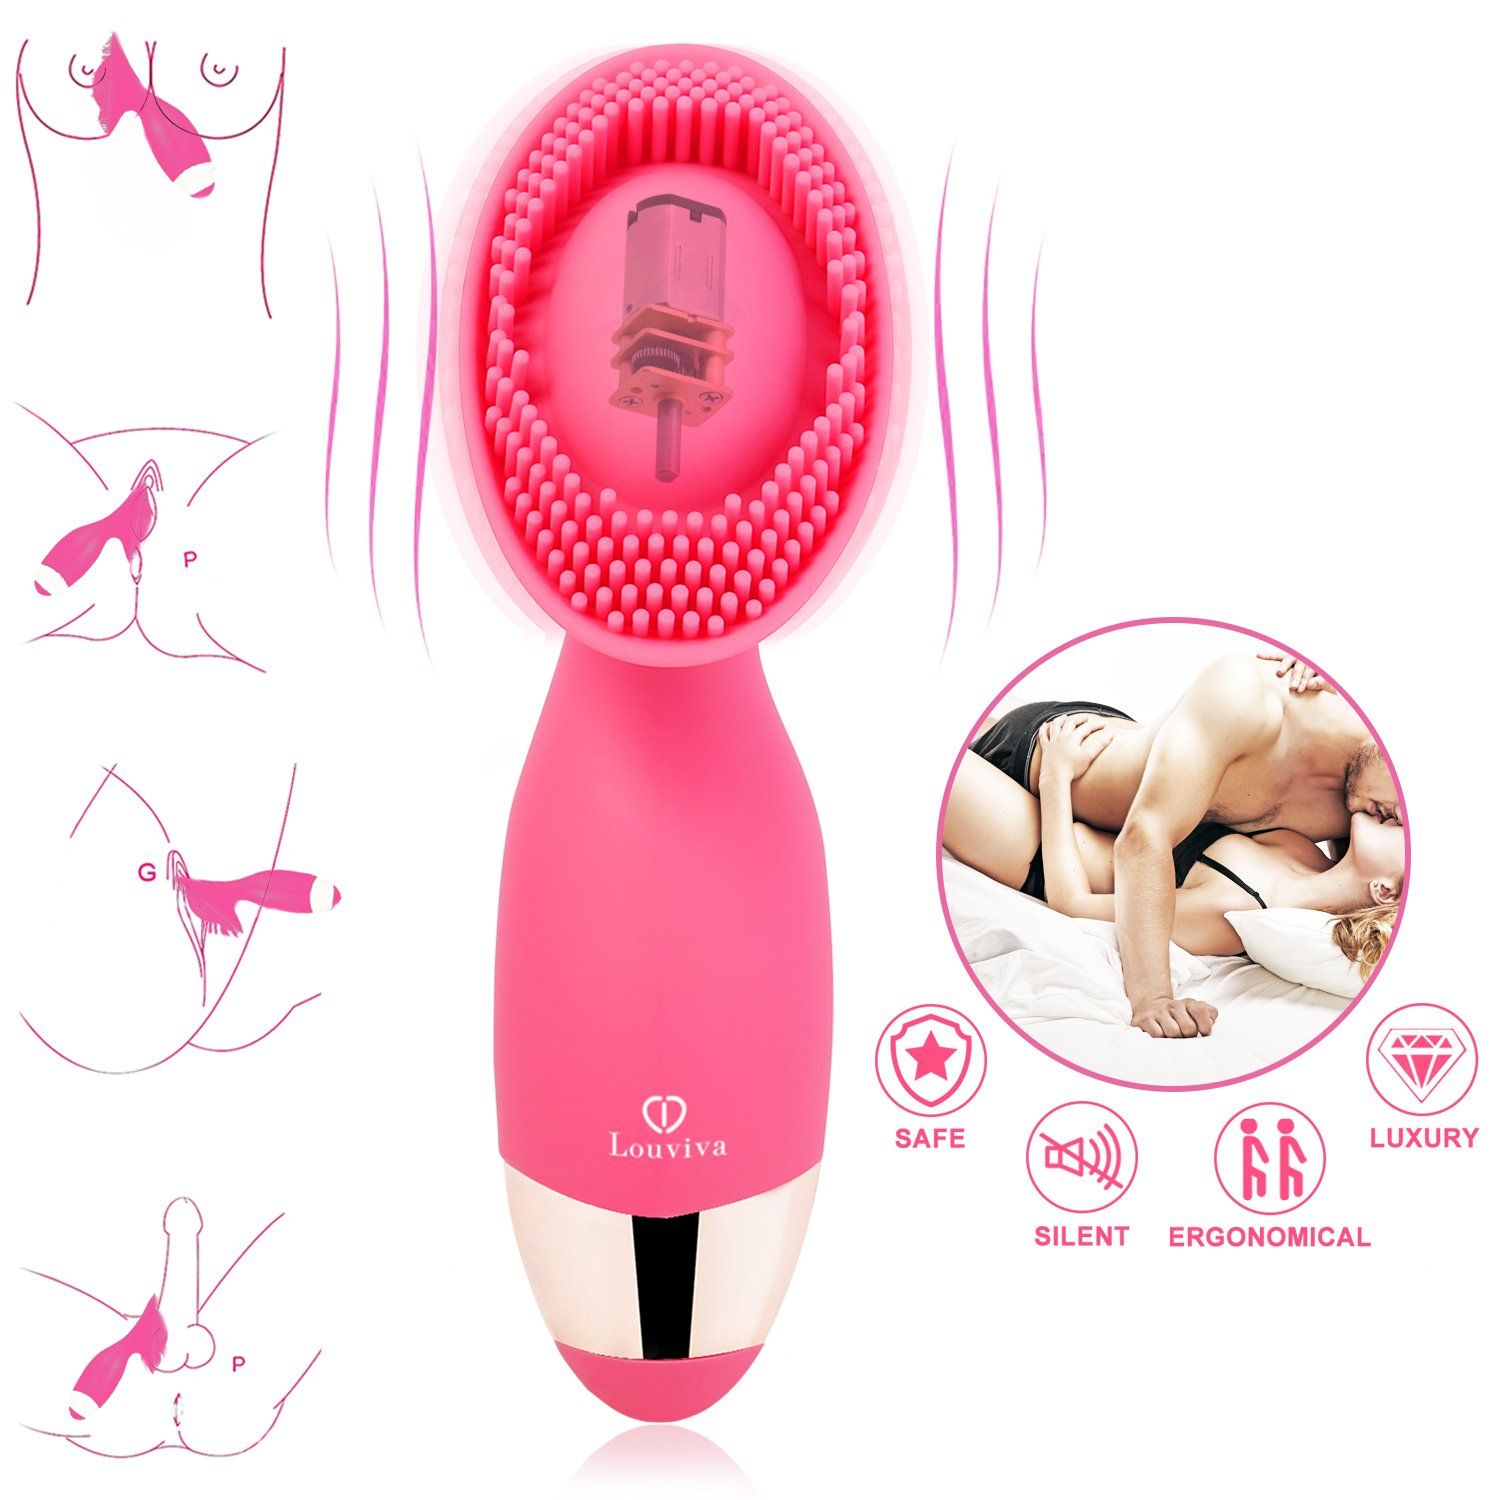 Sub reccomend Vibrator after vaginal delivery